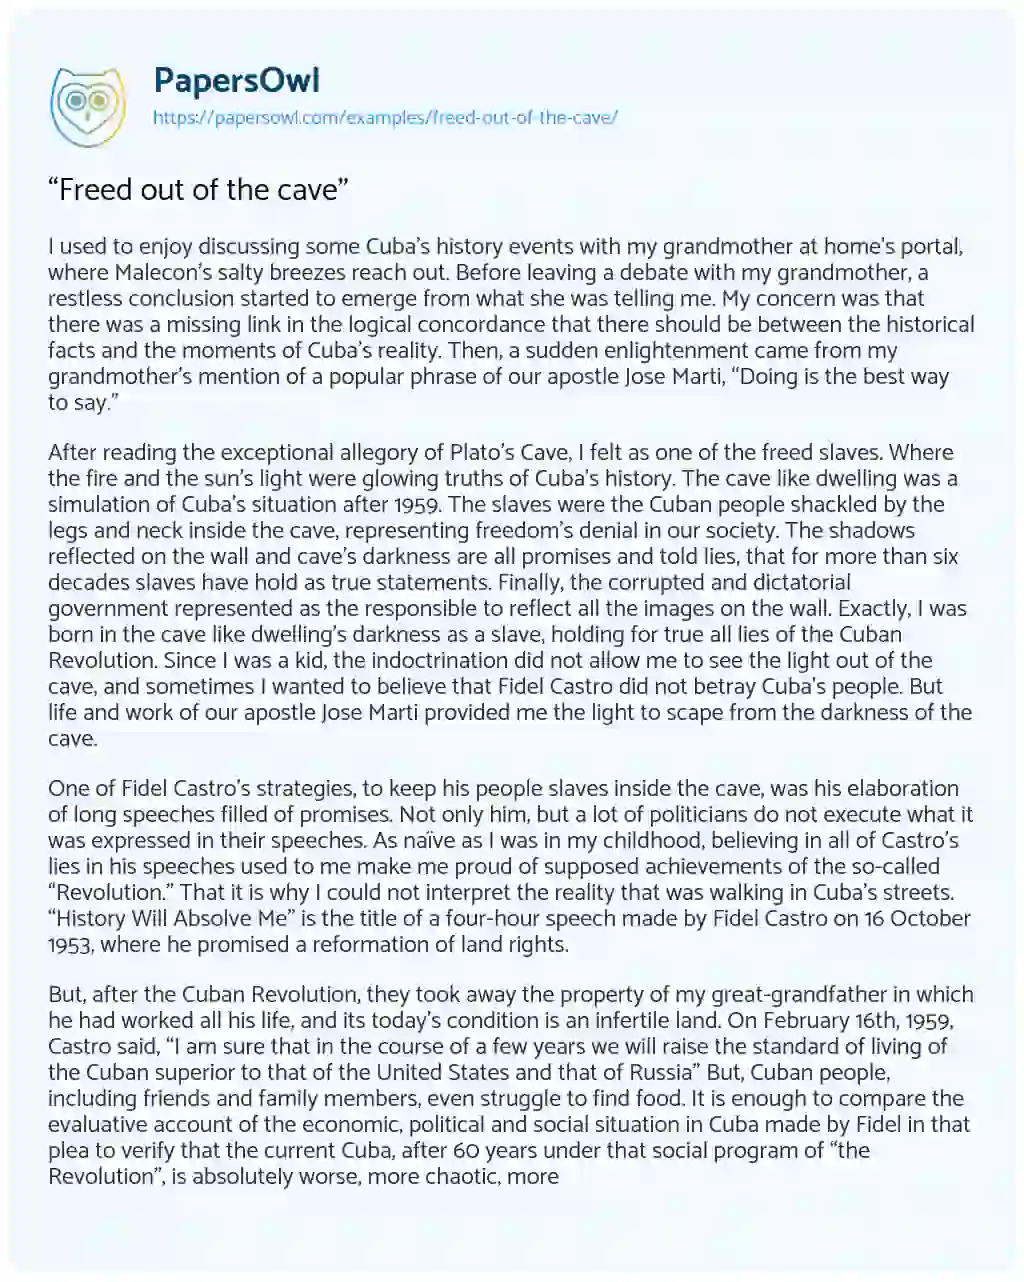 Essay on “Freed out of the Cave”